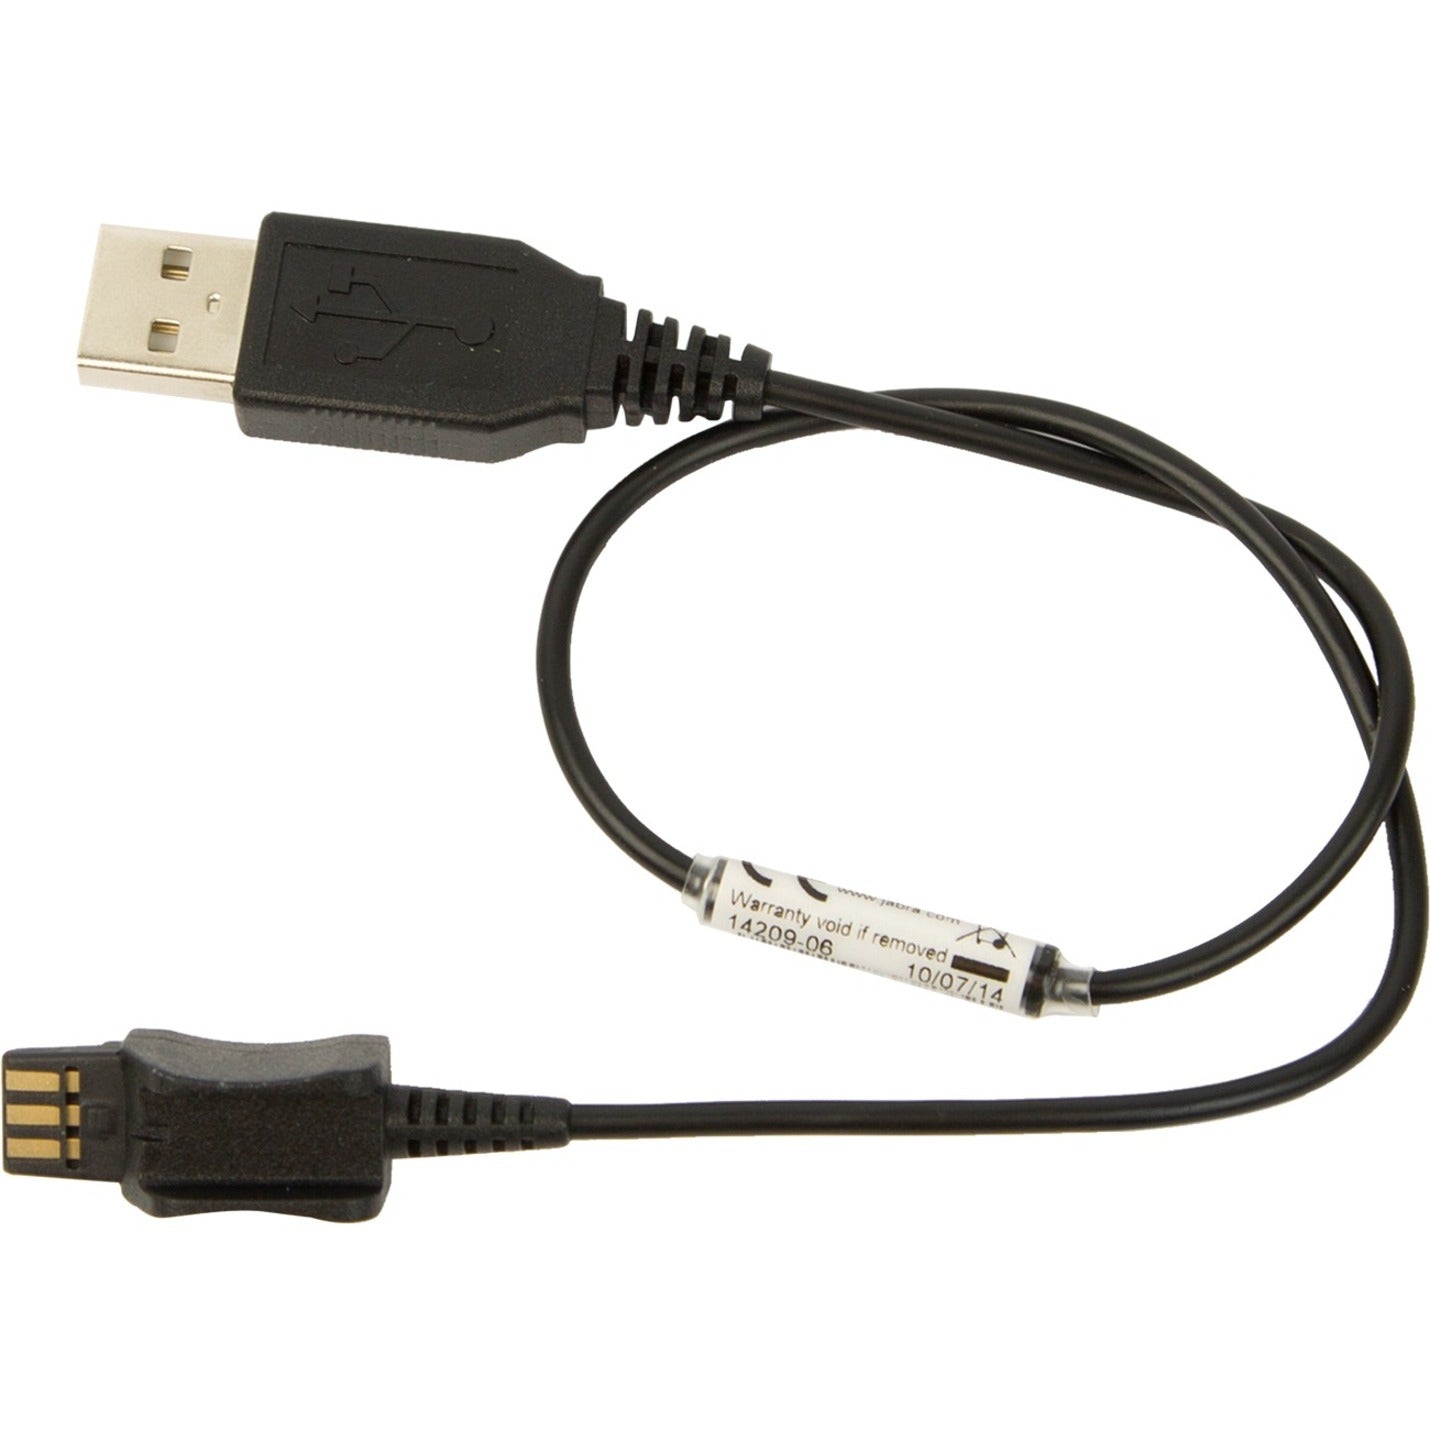 Jabra 14209-06 PRO 900 Charging Cable, For Headset